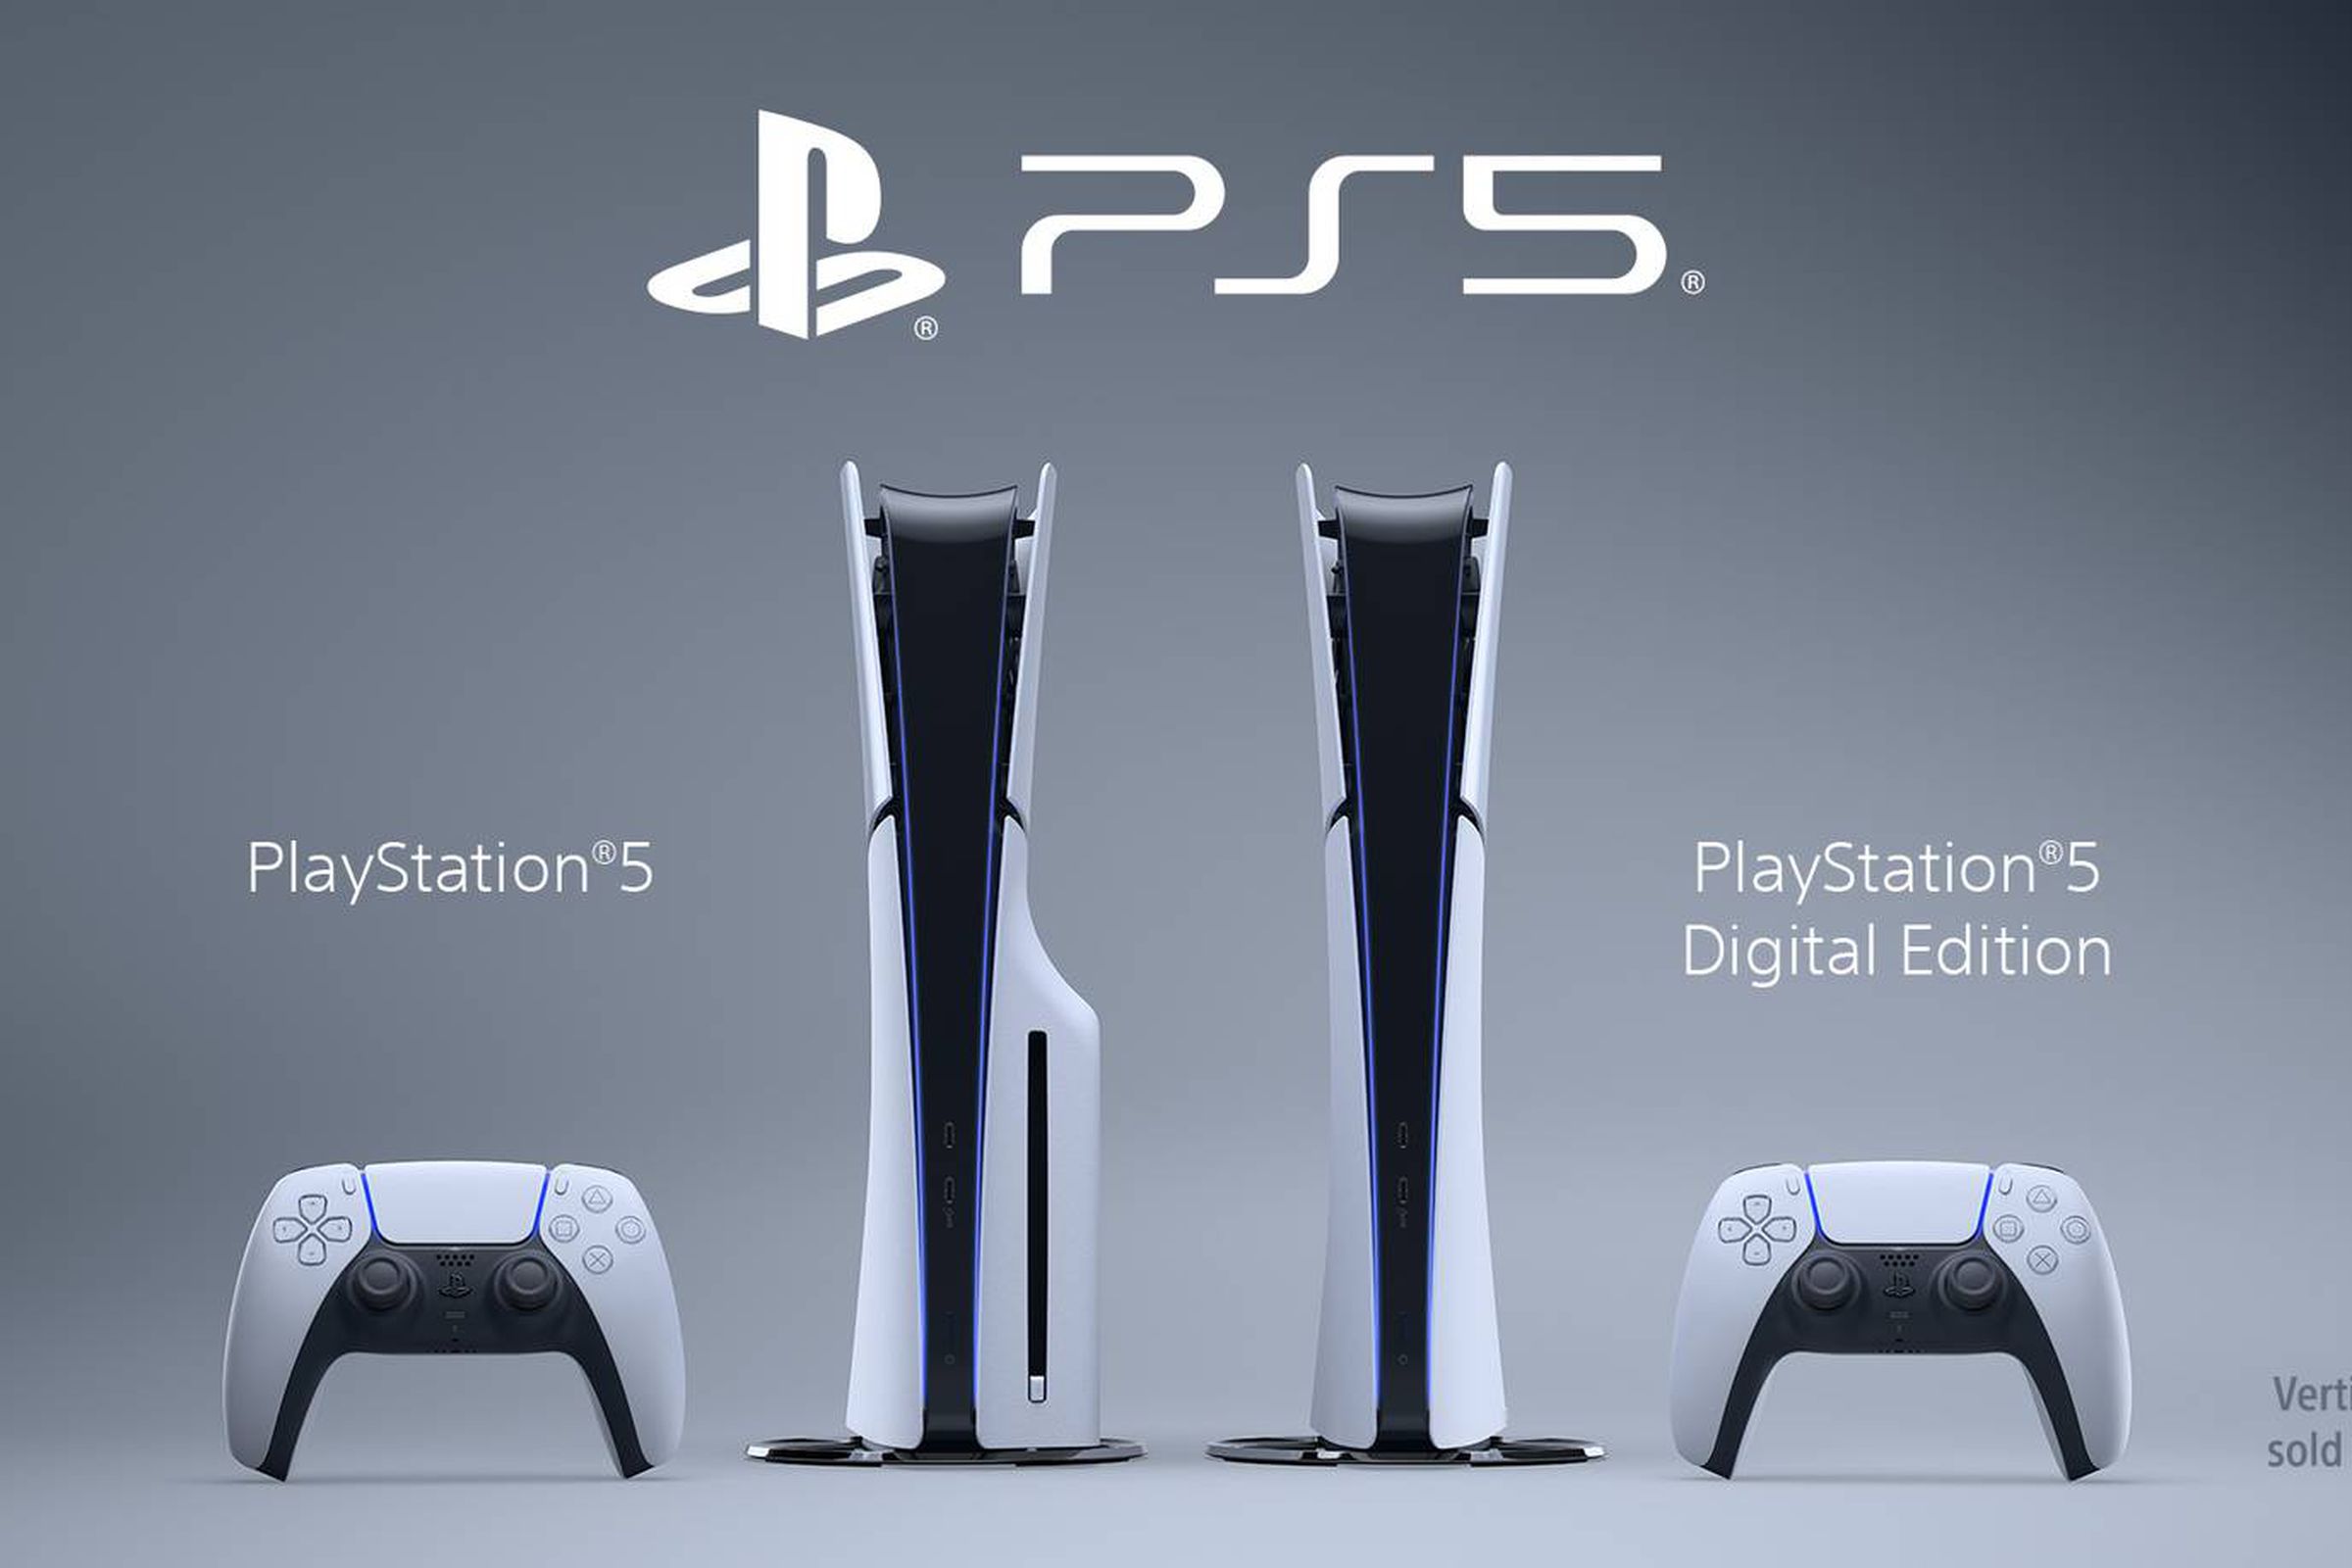 An image of the new PS5 models. On the left, the disc drive version, on the right, the digital version.